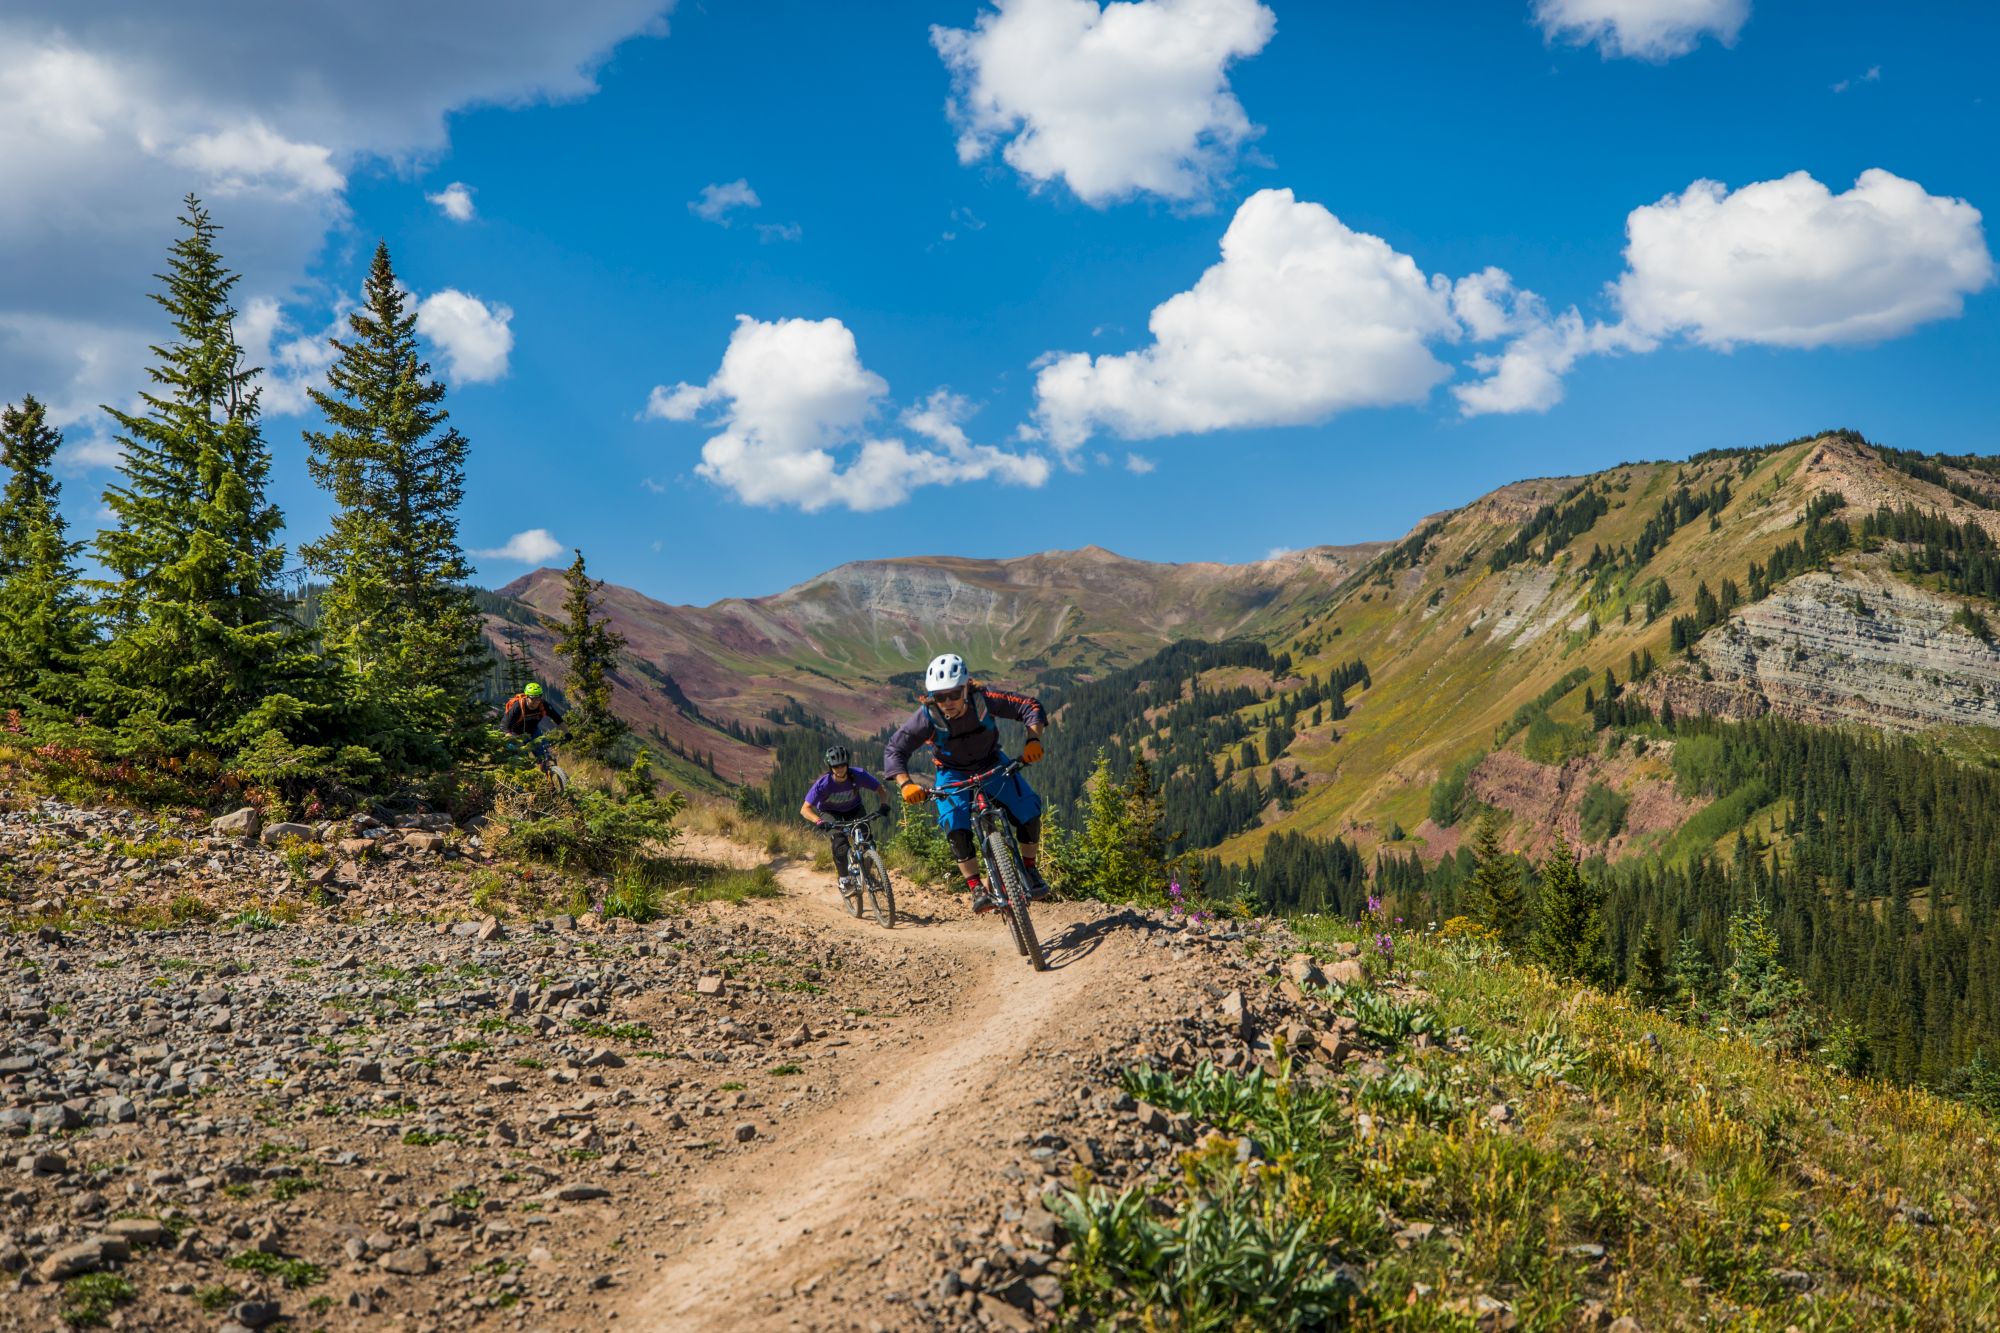 People are mountain biking on a rugged trail with scenic views of mountains, trees, and a blue sky with clouds in the background.